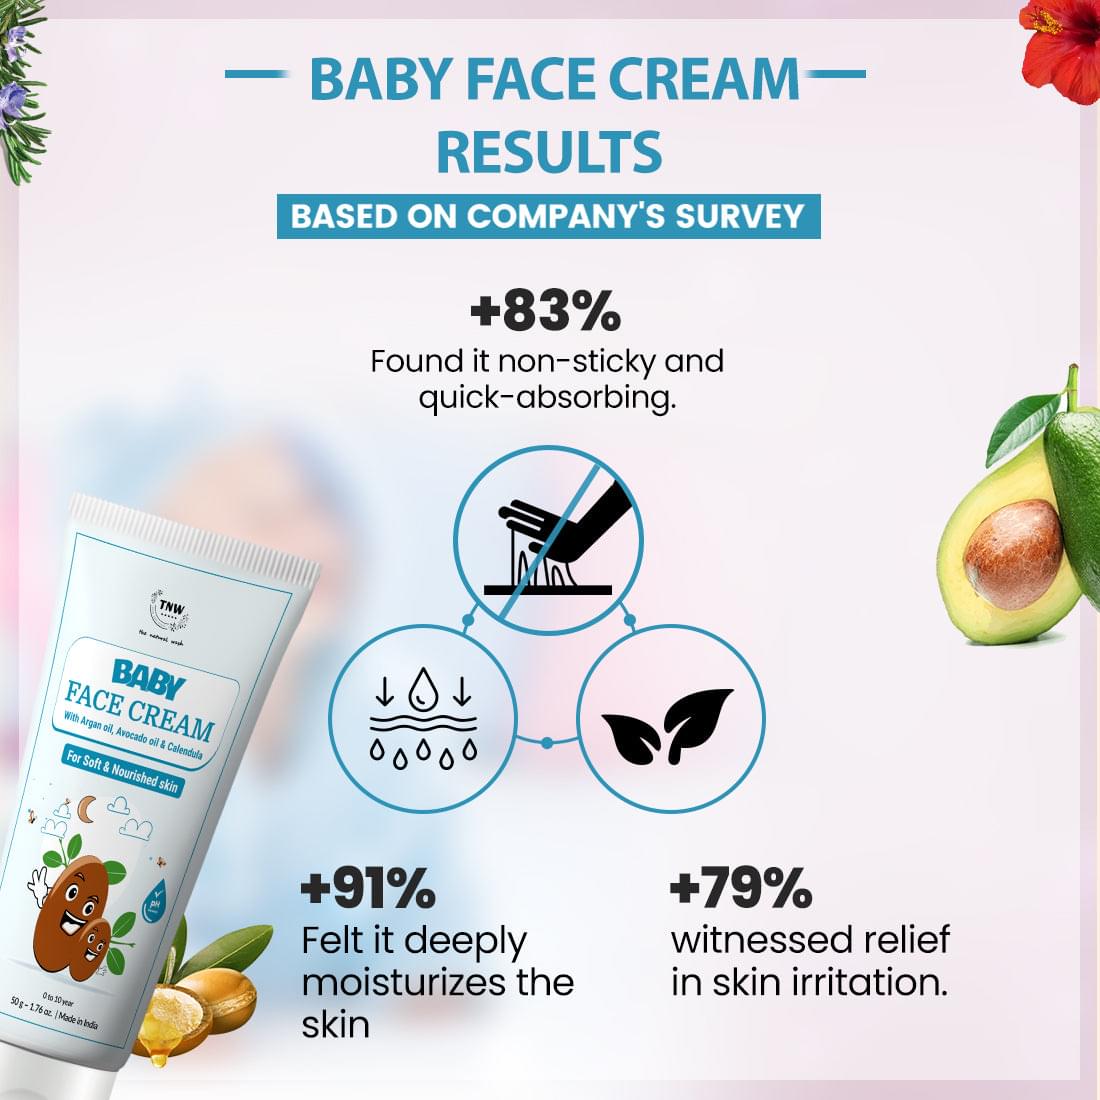 Baby Face Cream for Soft Skin